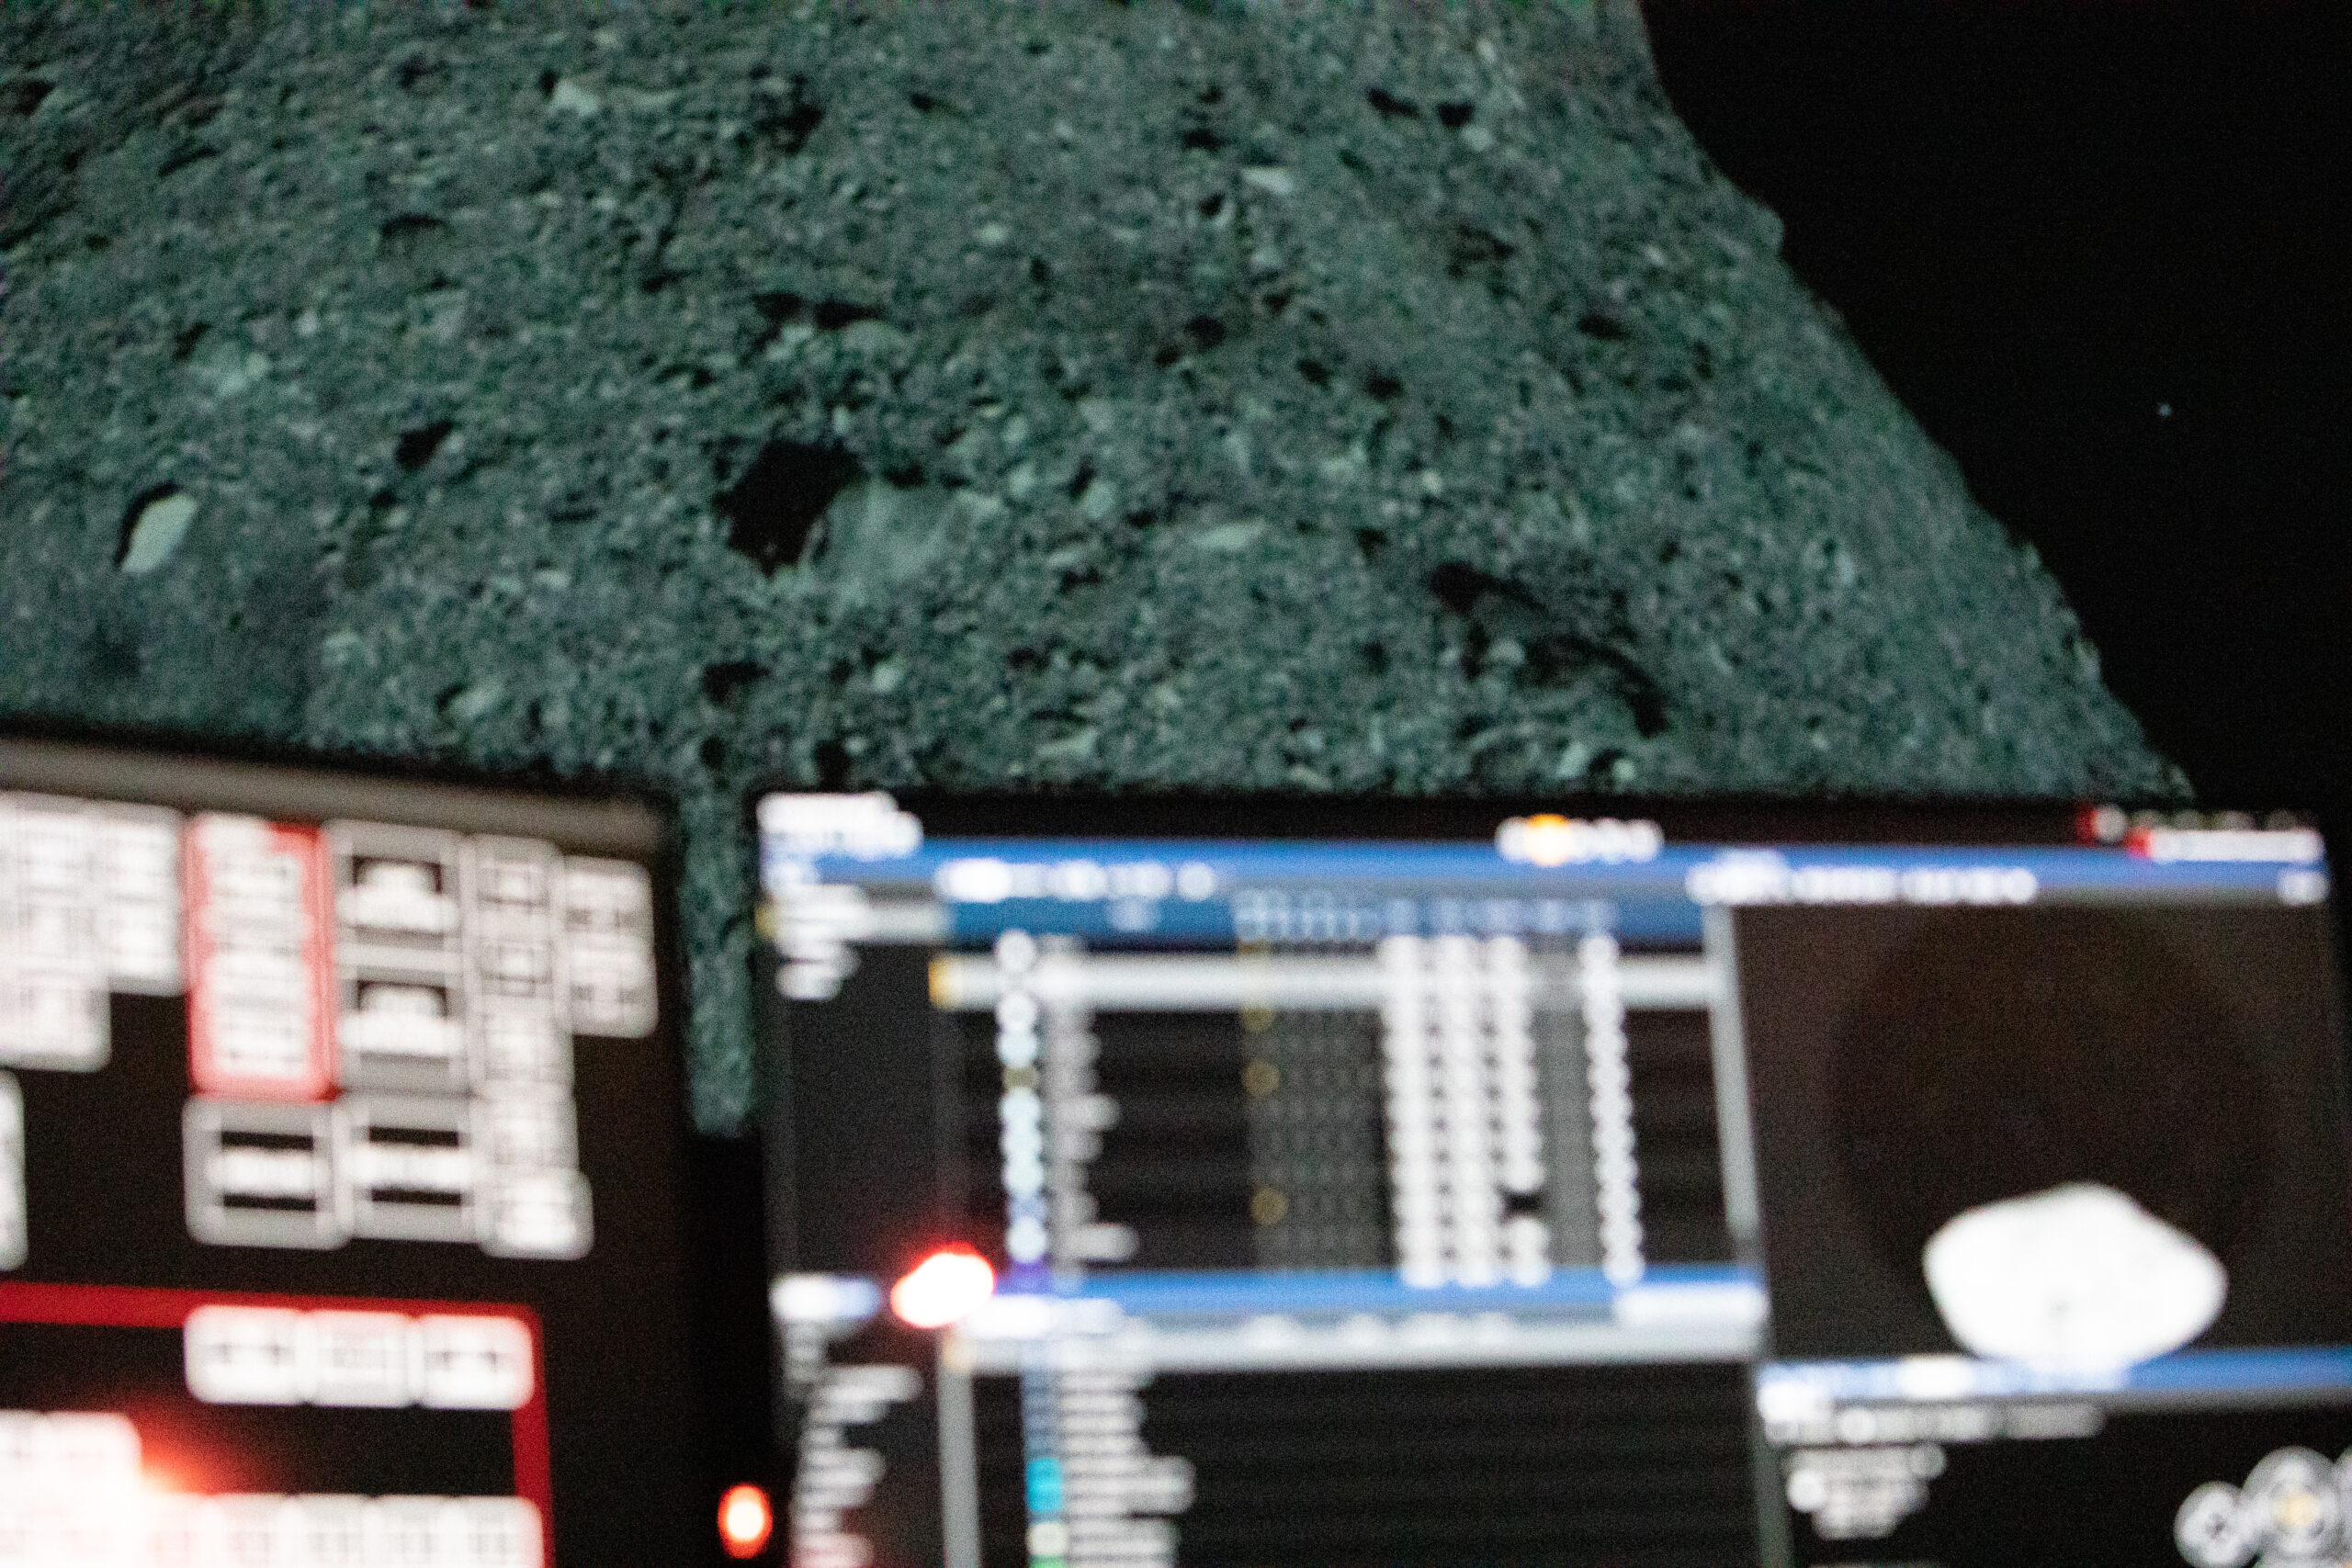 Two computer monitors in the foreground (blurred) with an image of the lunar surface in the background.